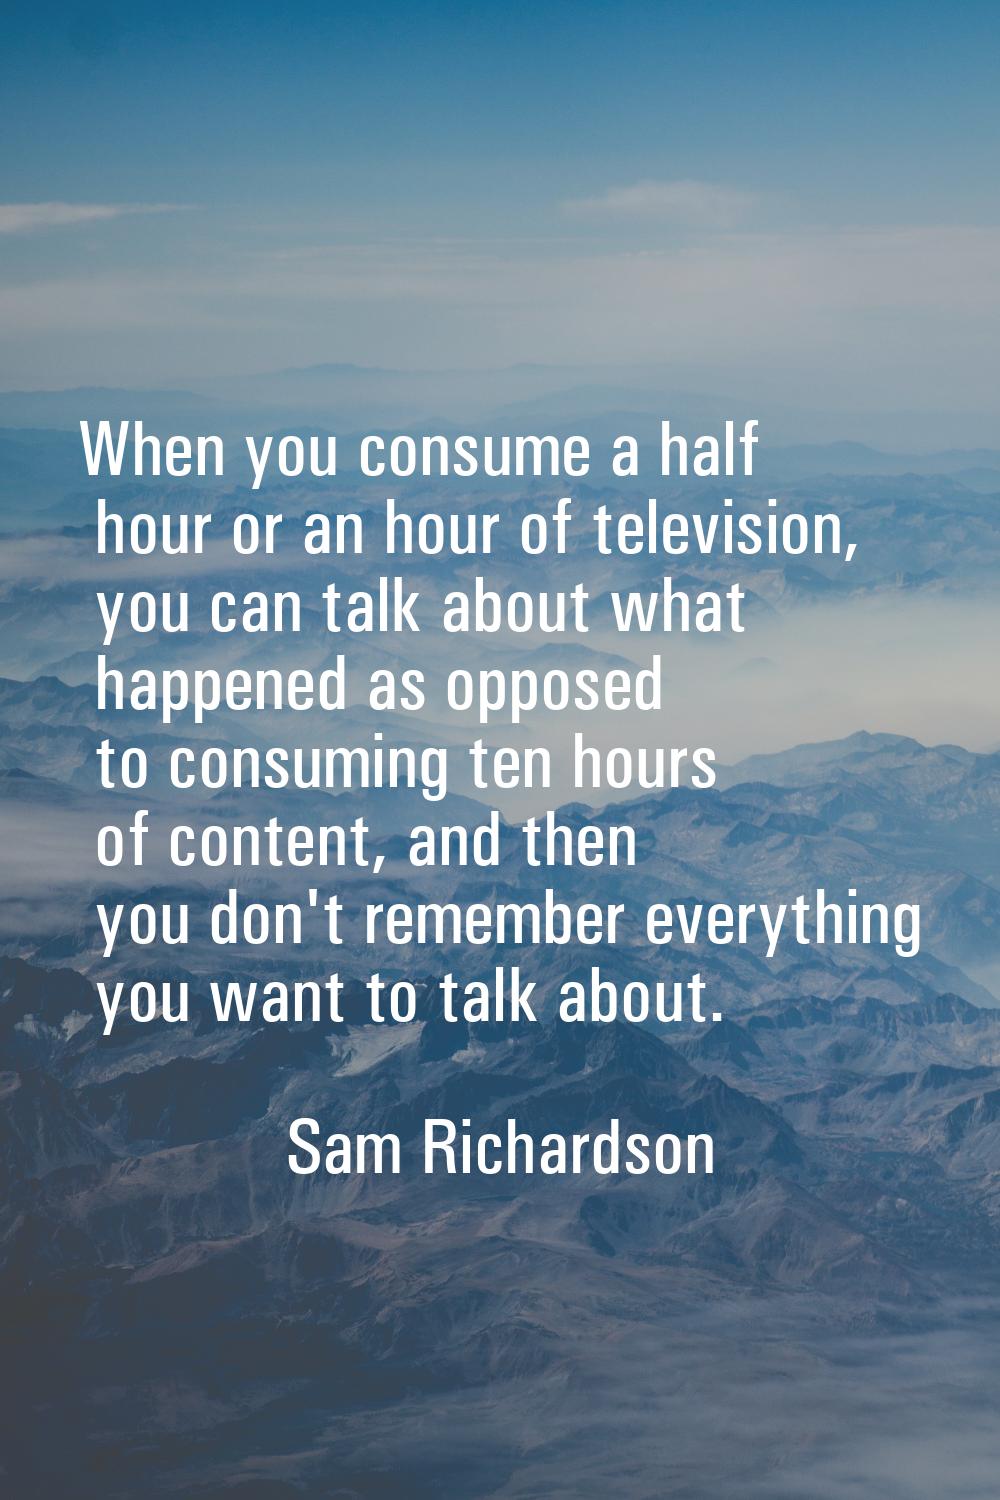 When you consume a half hour or an hour of television, you can talk about what happened as opposed 